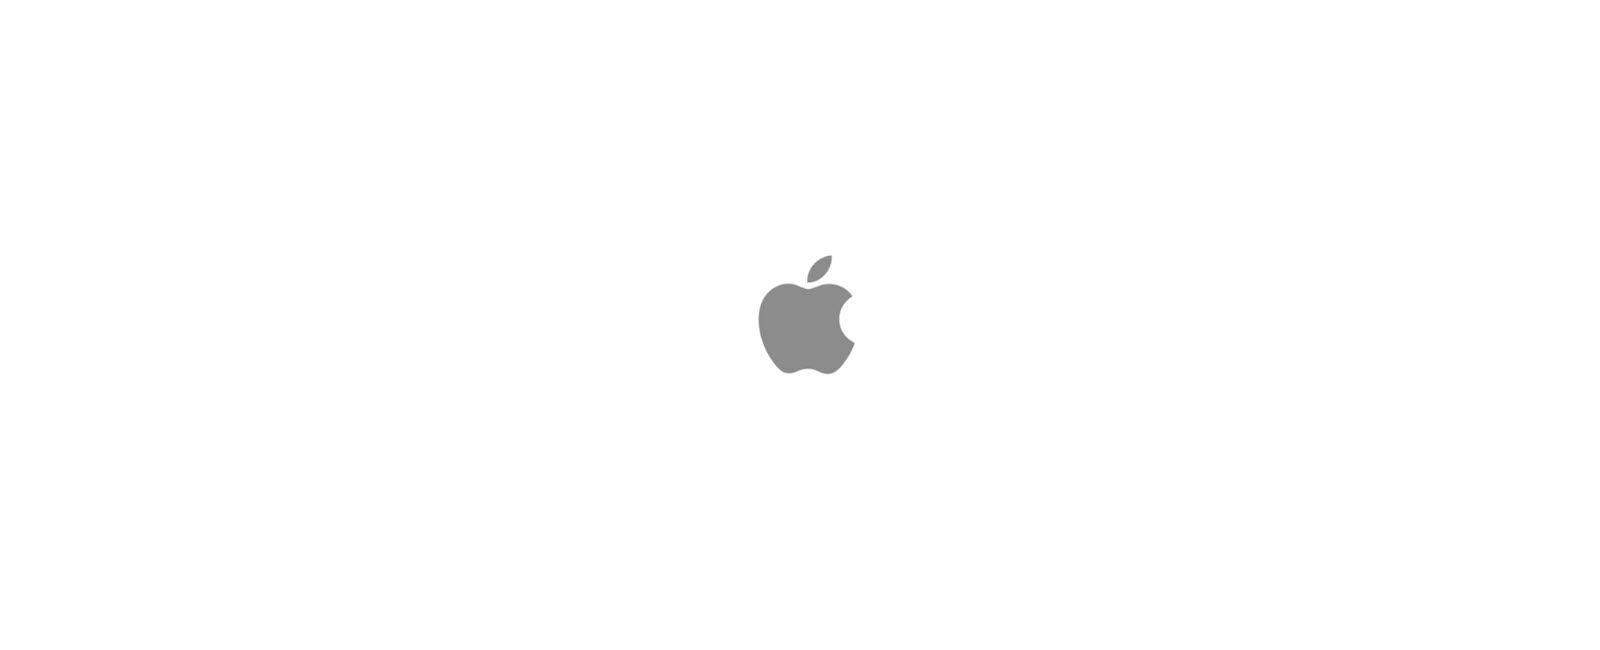 New 2016 Small Apple Logo - Why is No One Talking about Apple Search Ads? | Bloom